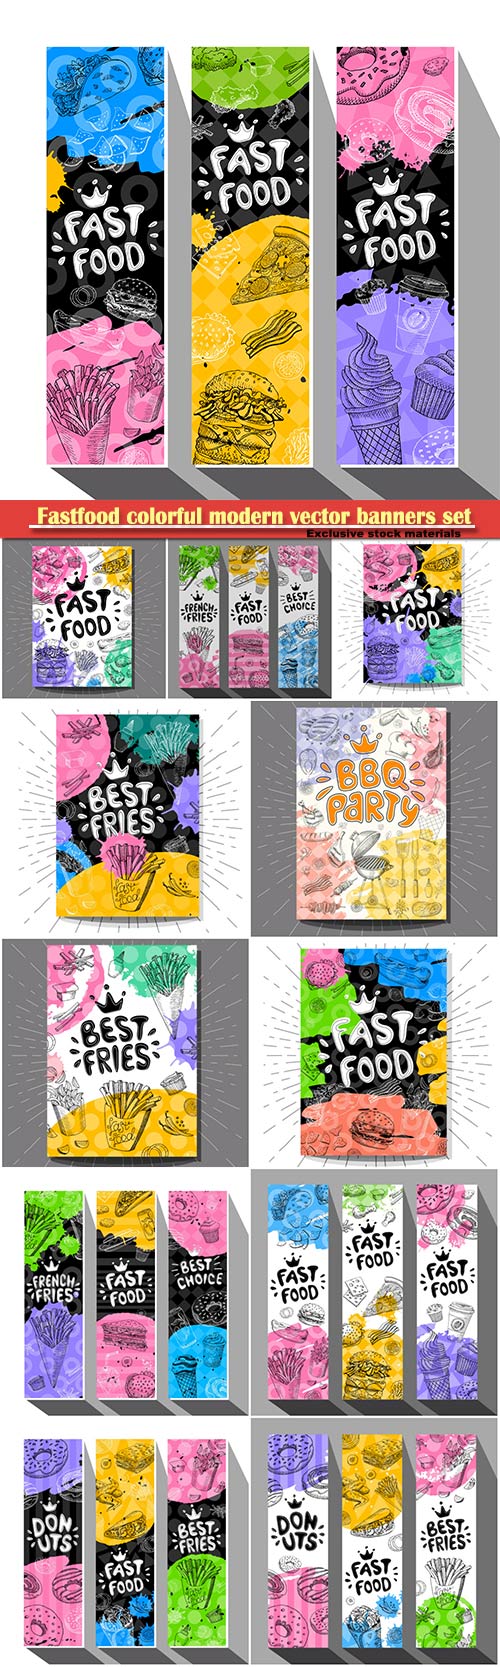 Fastfood colorful modern vector banners set # 2